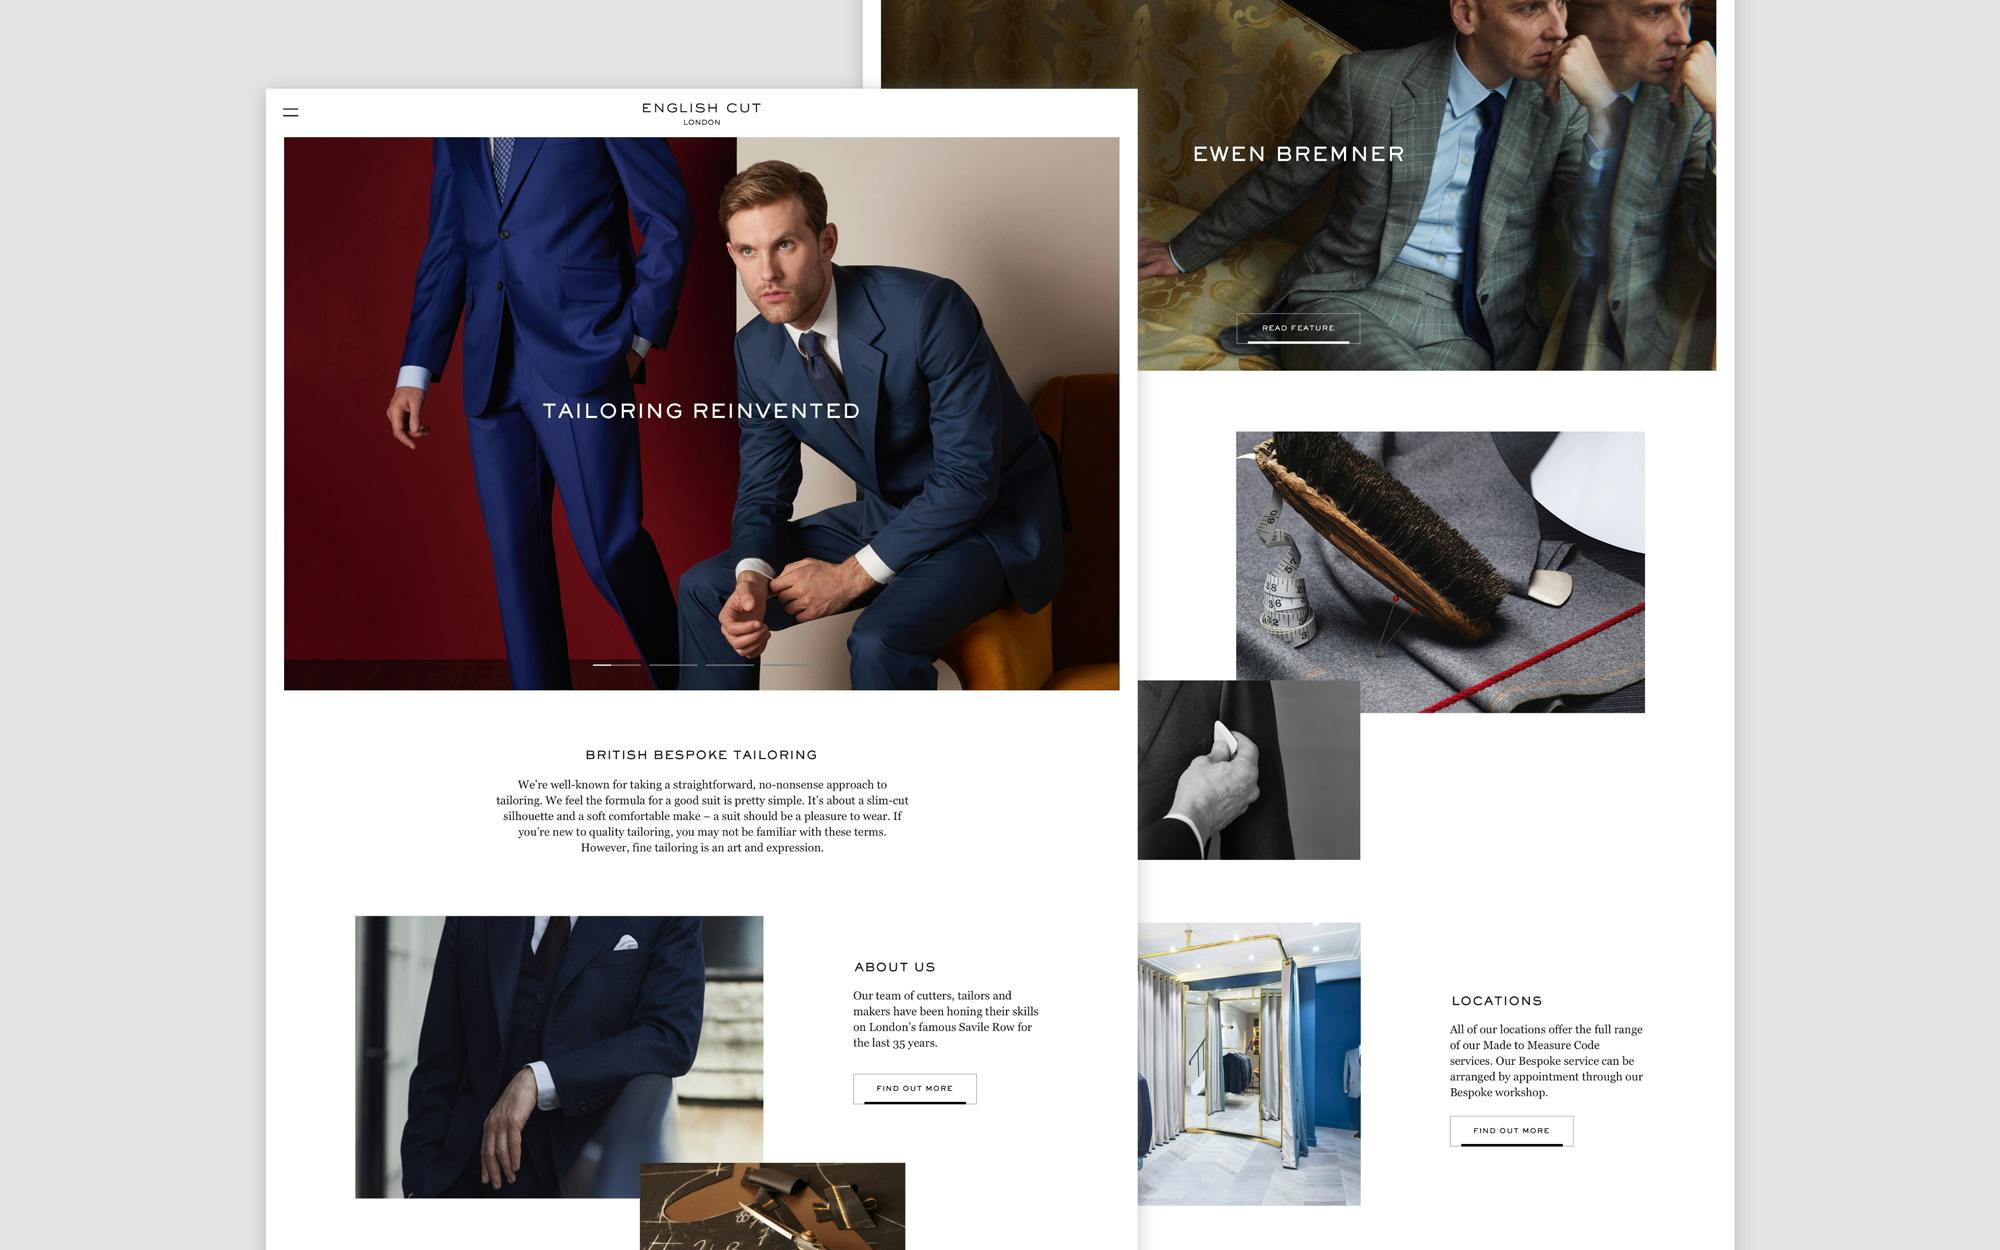 Website for London Tailors English Cut, designed by Extract Studio